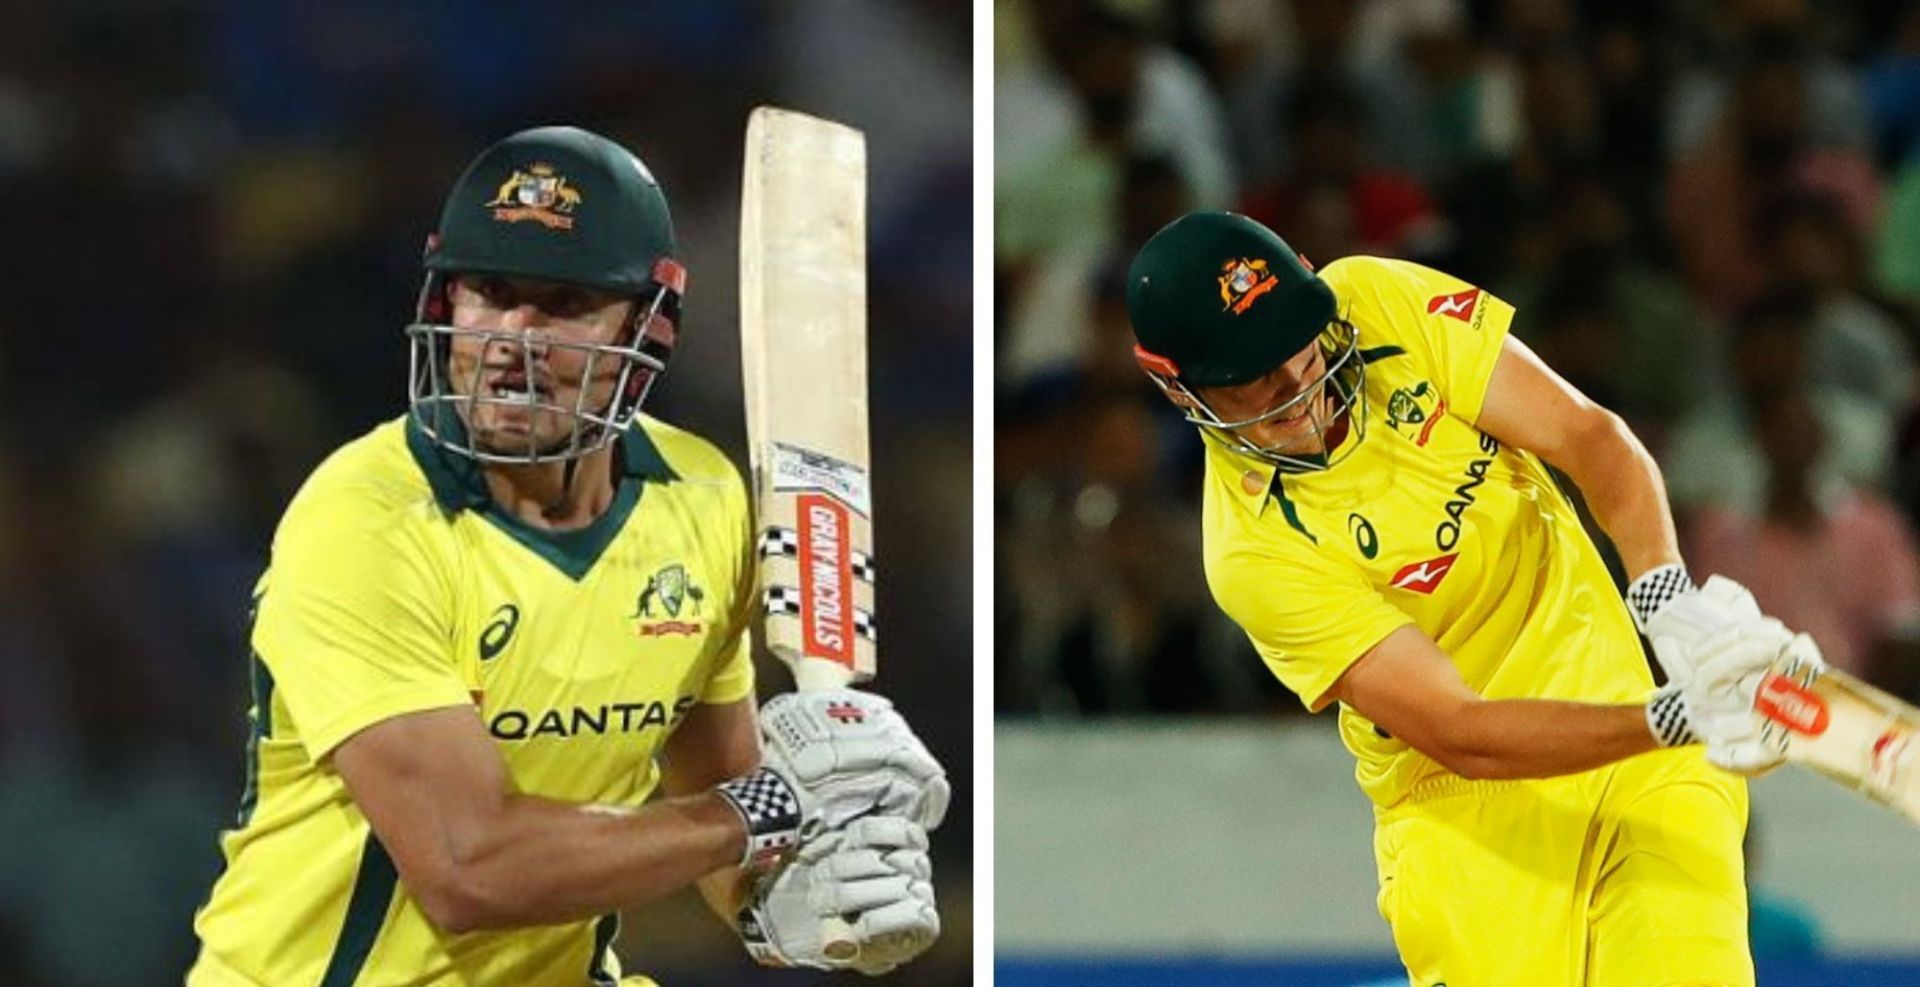 Marcus Stoinis and Cameron Green have struggled as all-rounders of late. (Credits: Twitter)